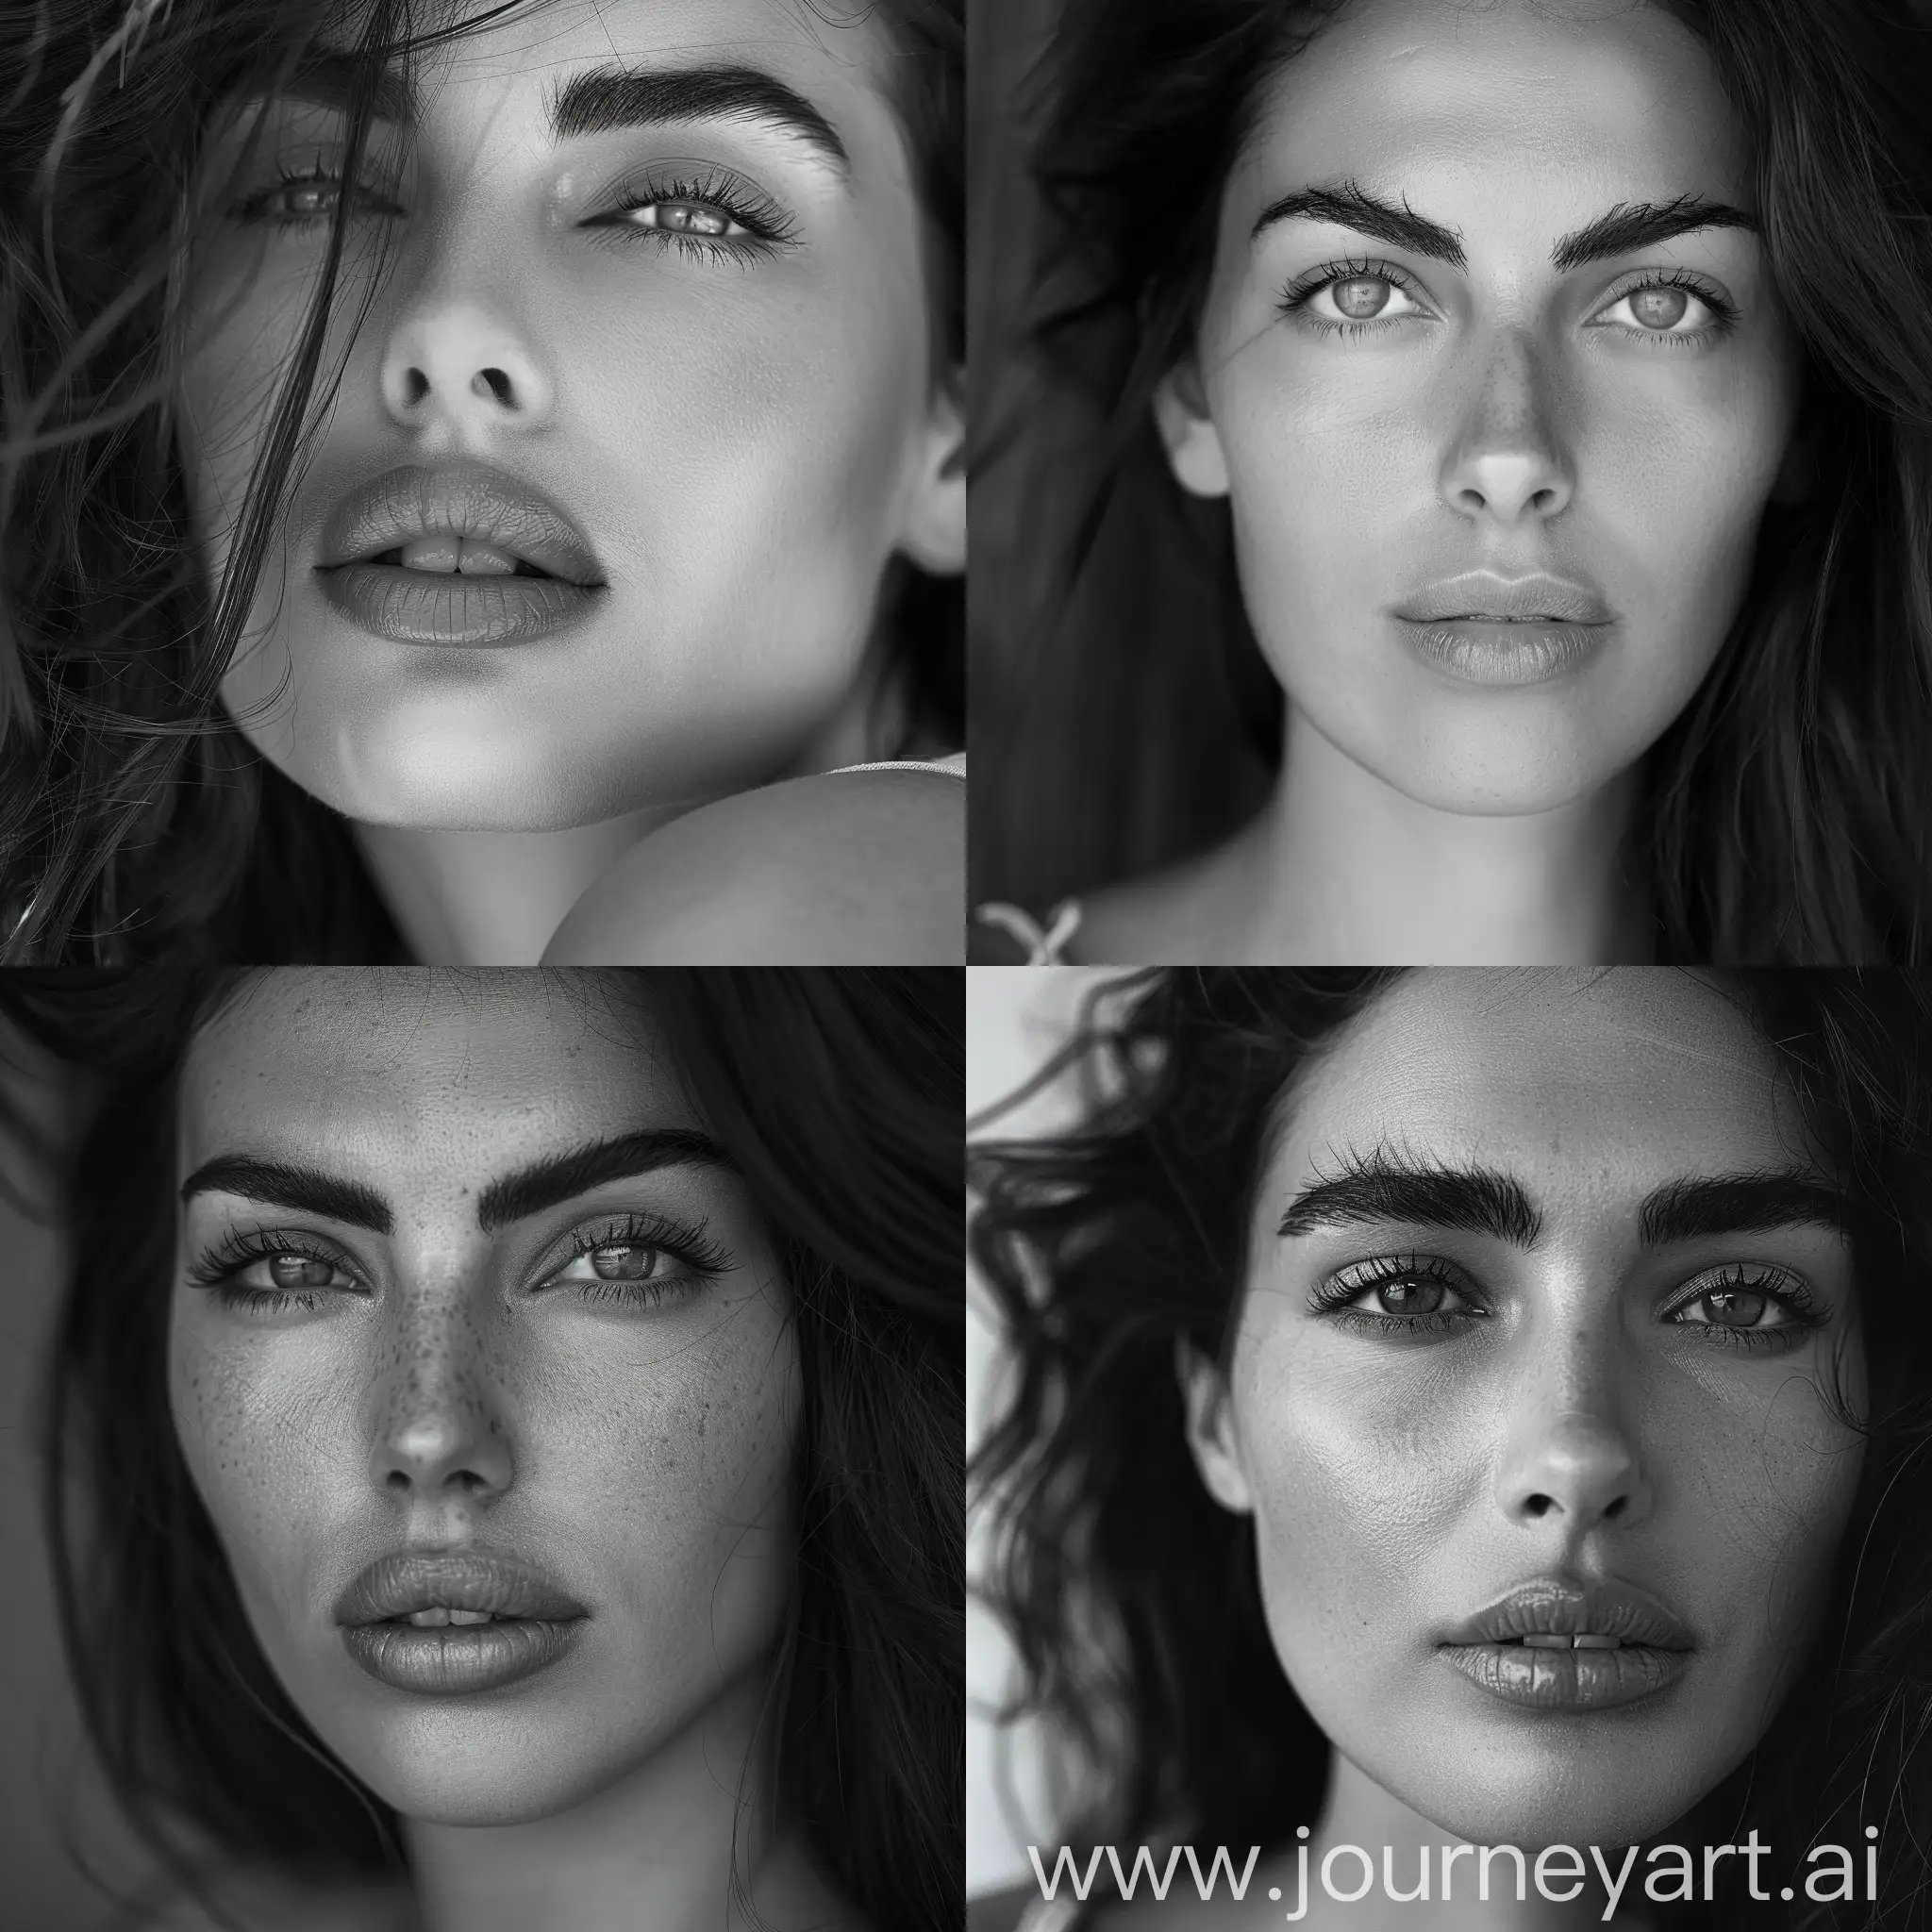 Captivating-Portrait-of-Greek-Woman-with-Broad-Nose-and-Bushy-Eyebrows